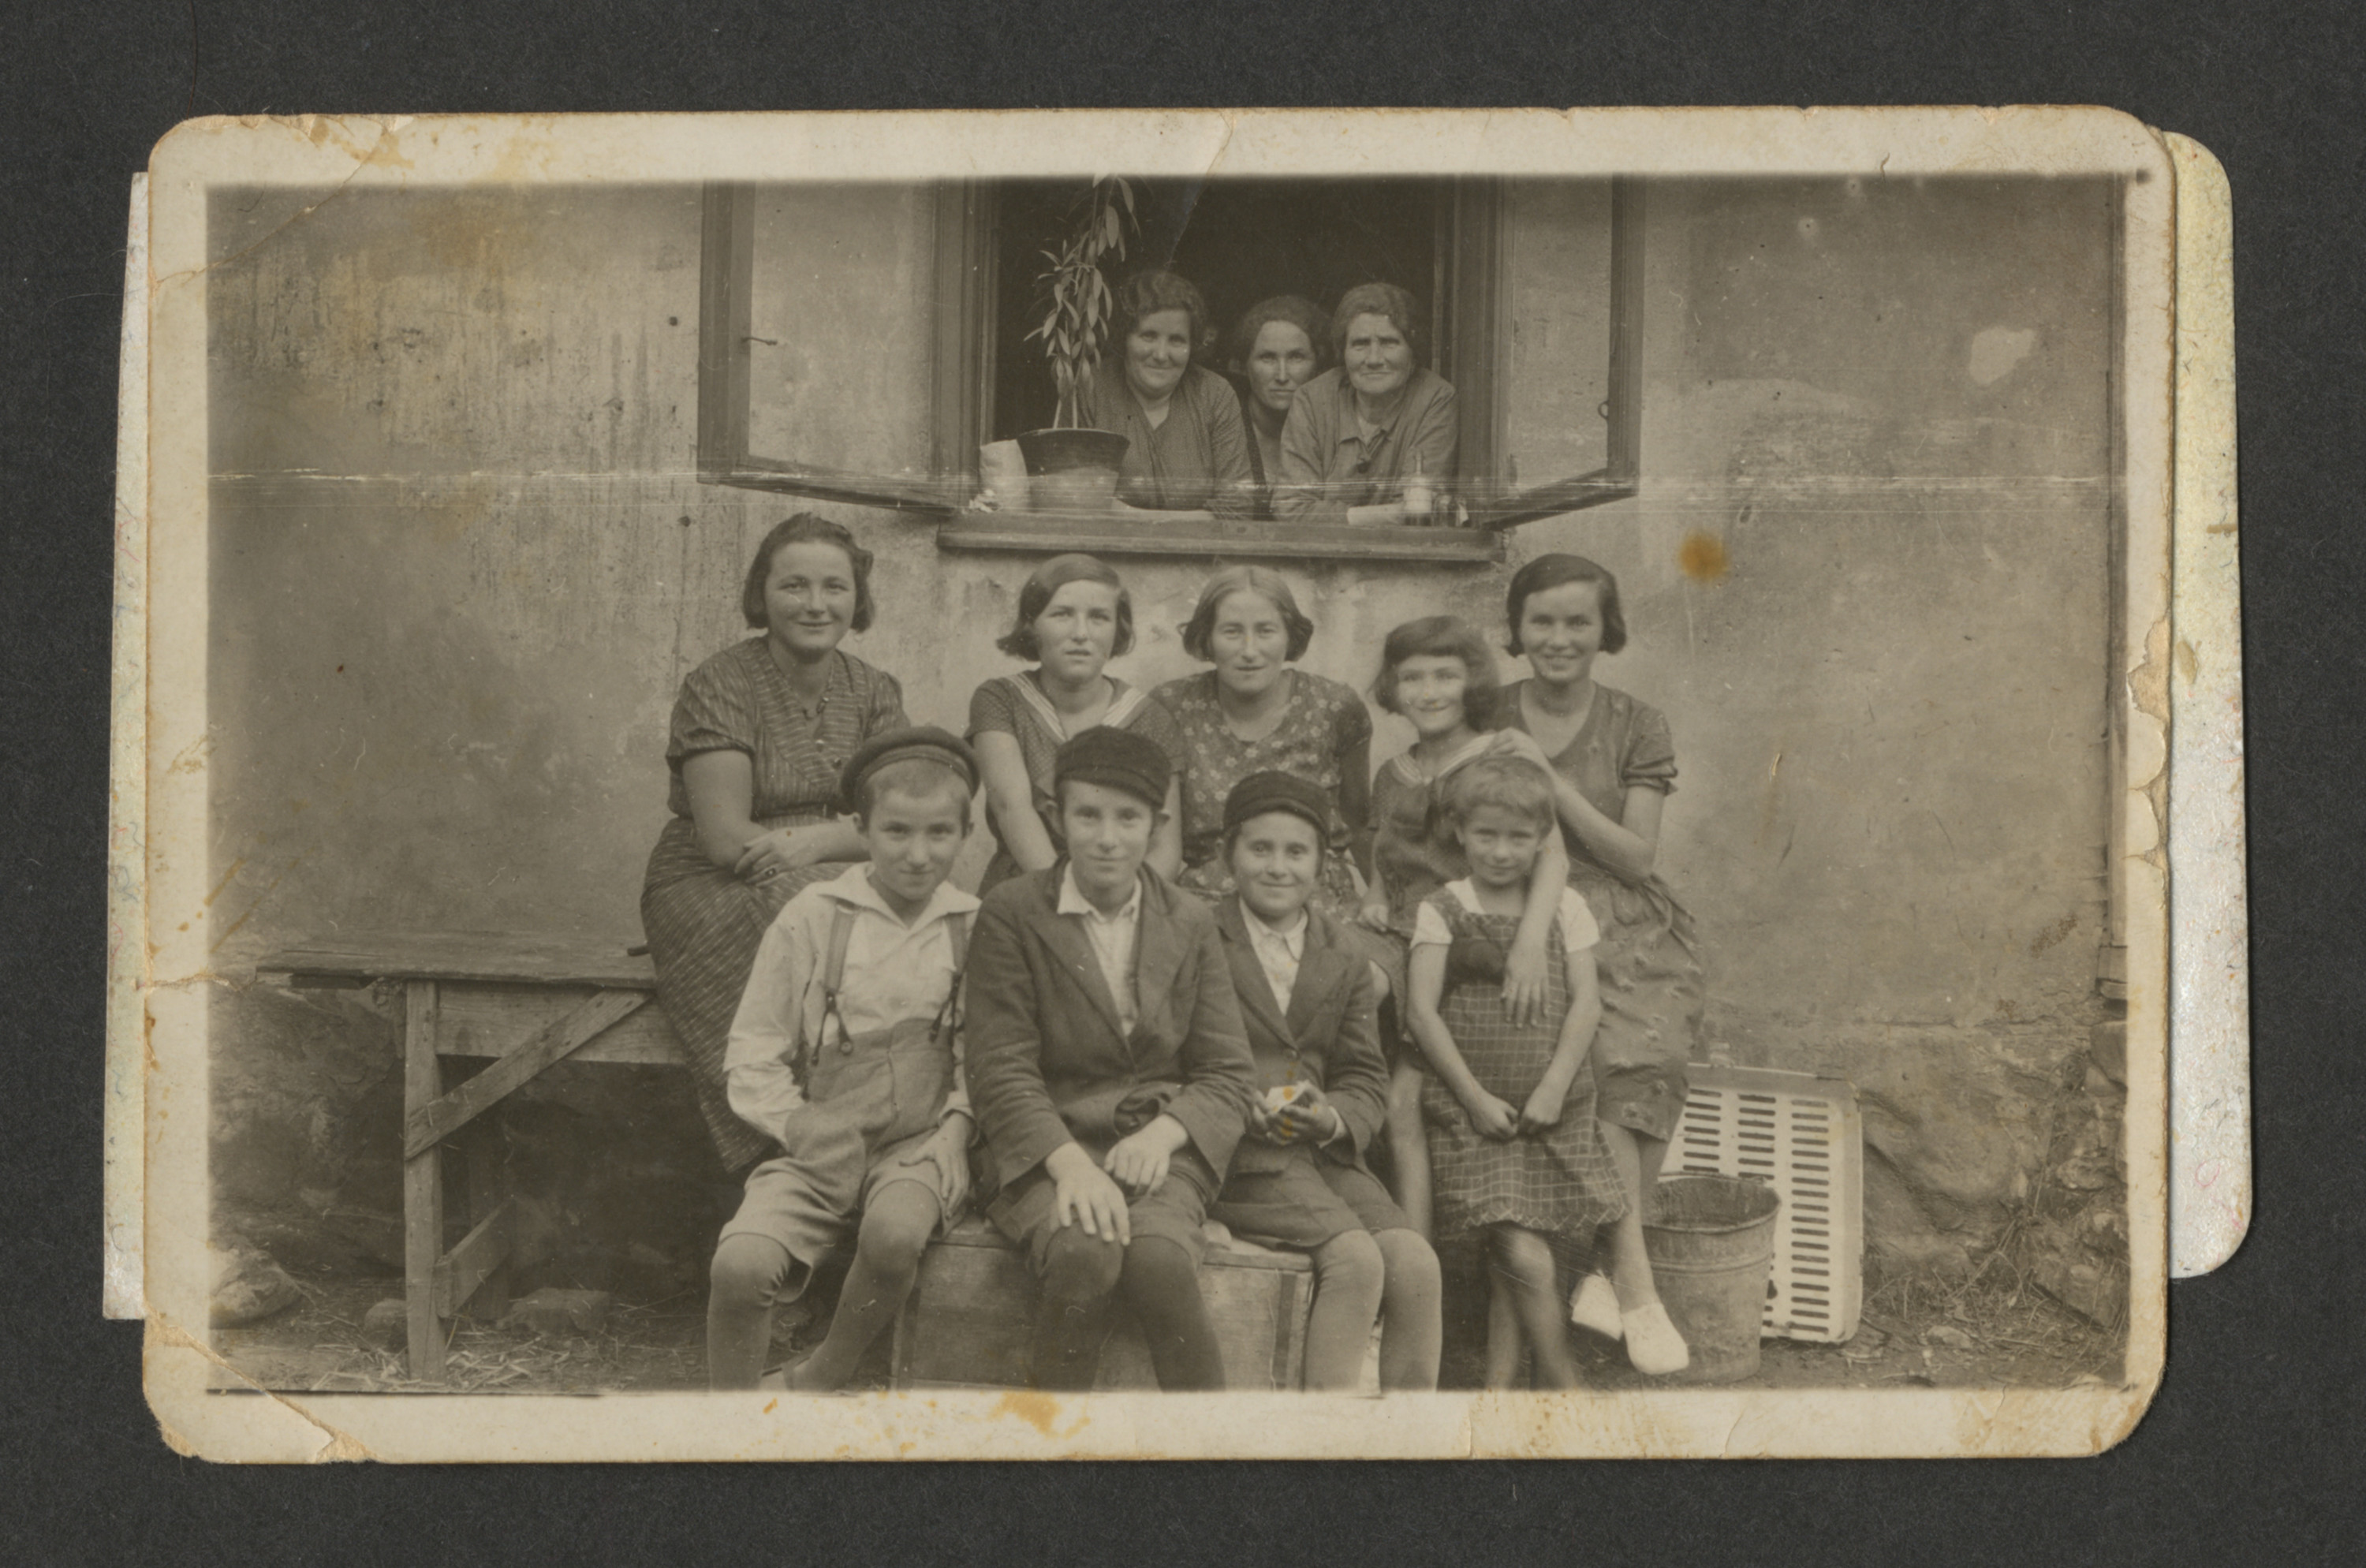 A Polish Jewish family gathers for a photograph.

Among those pictured are (front row, left to right) Yoel Ullman and brothers Moshe and Mayer Spiro.  Blima Spiro is pictured seated in back, far right.